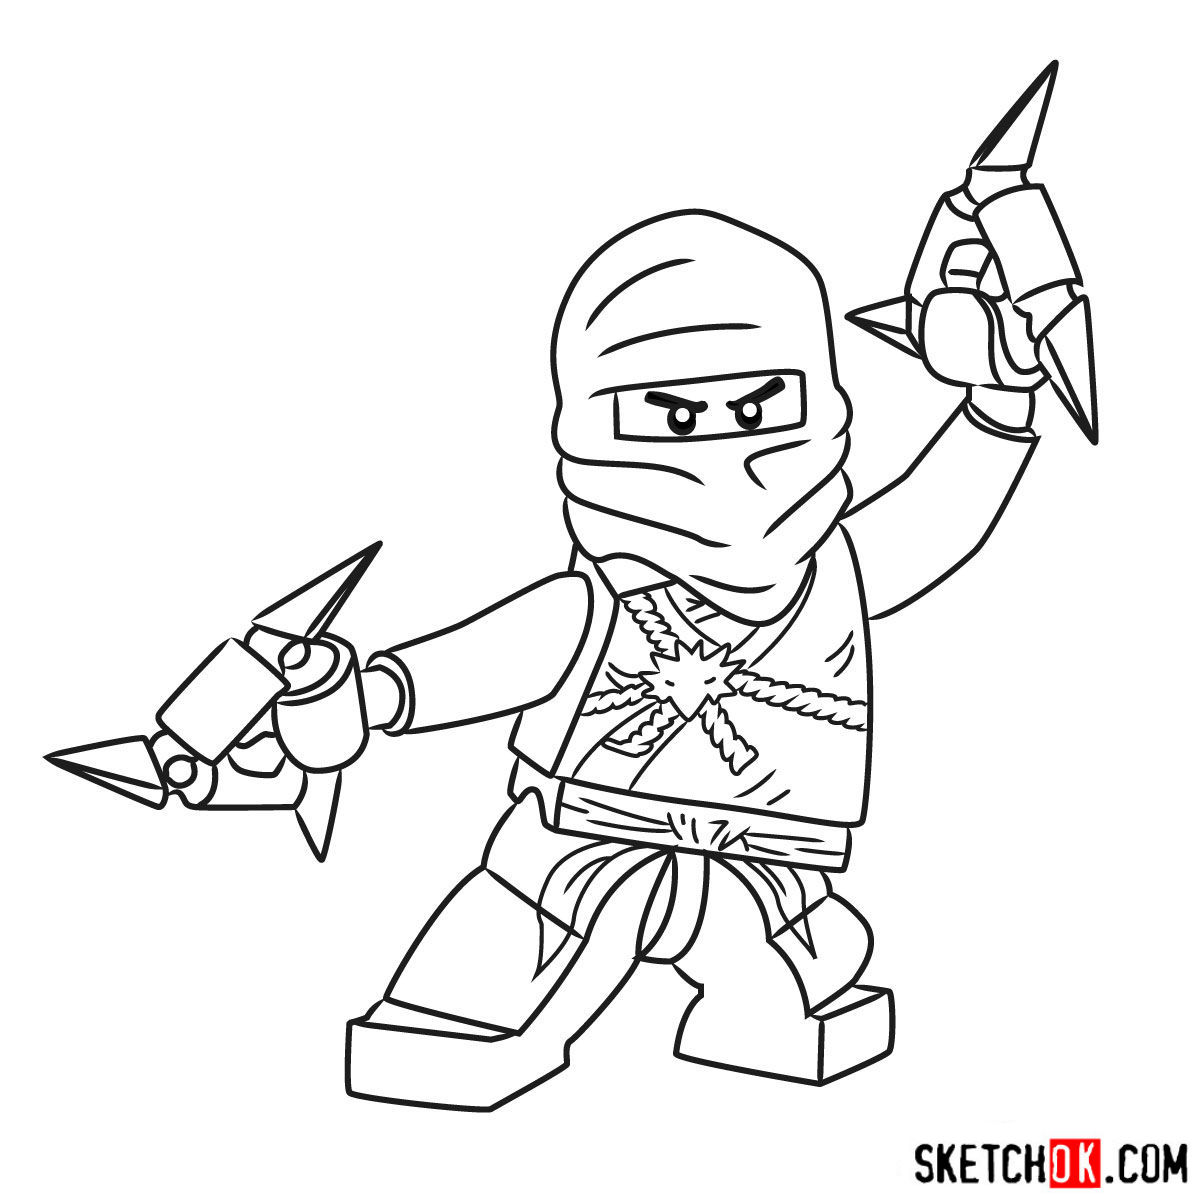 Lego Ninjago Drawing at PaintingValley.com | Explore collection of Lego ...